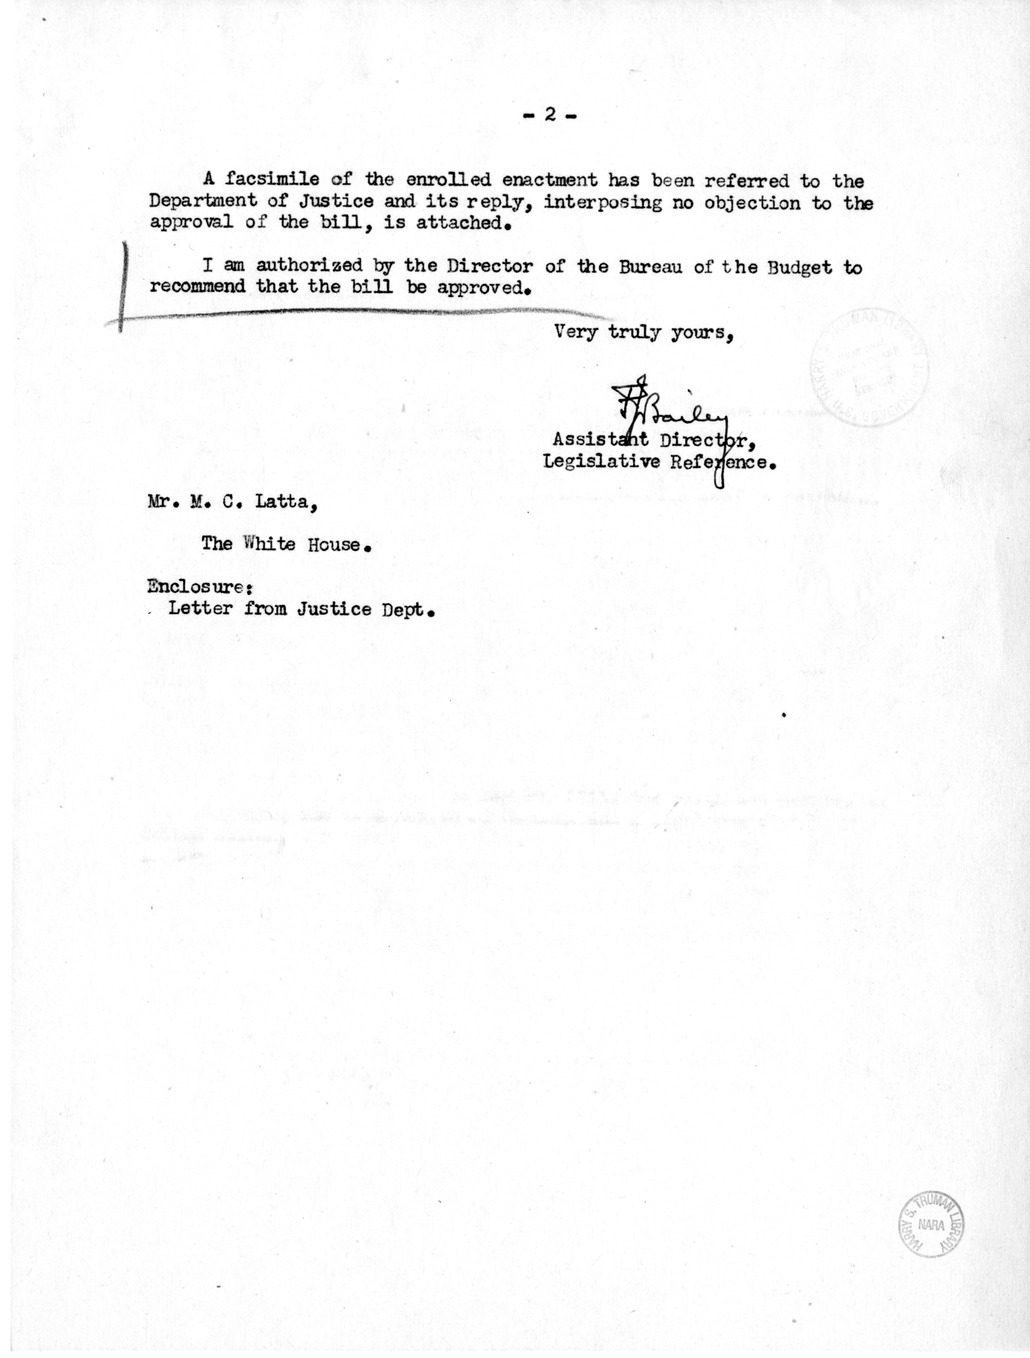 Memorandum from Frederick J. Bailey to M. C. Latta, H. R. 1325, for the Relief of Mrs. Rose Schiffer, with Attachments